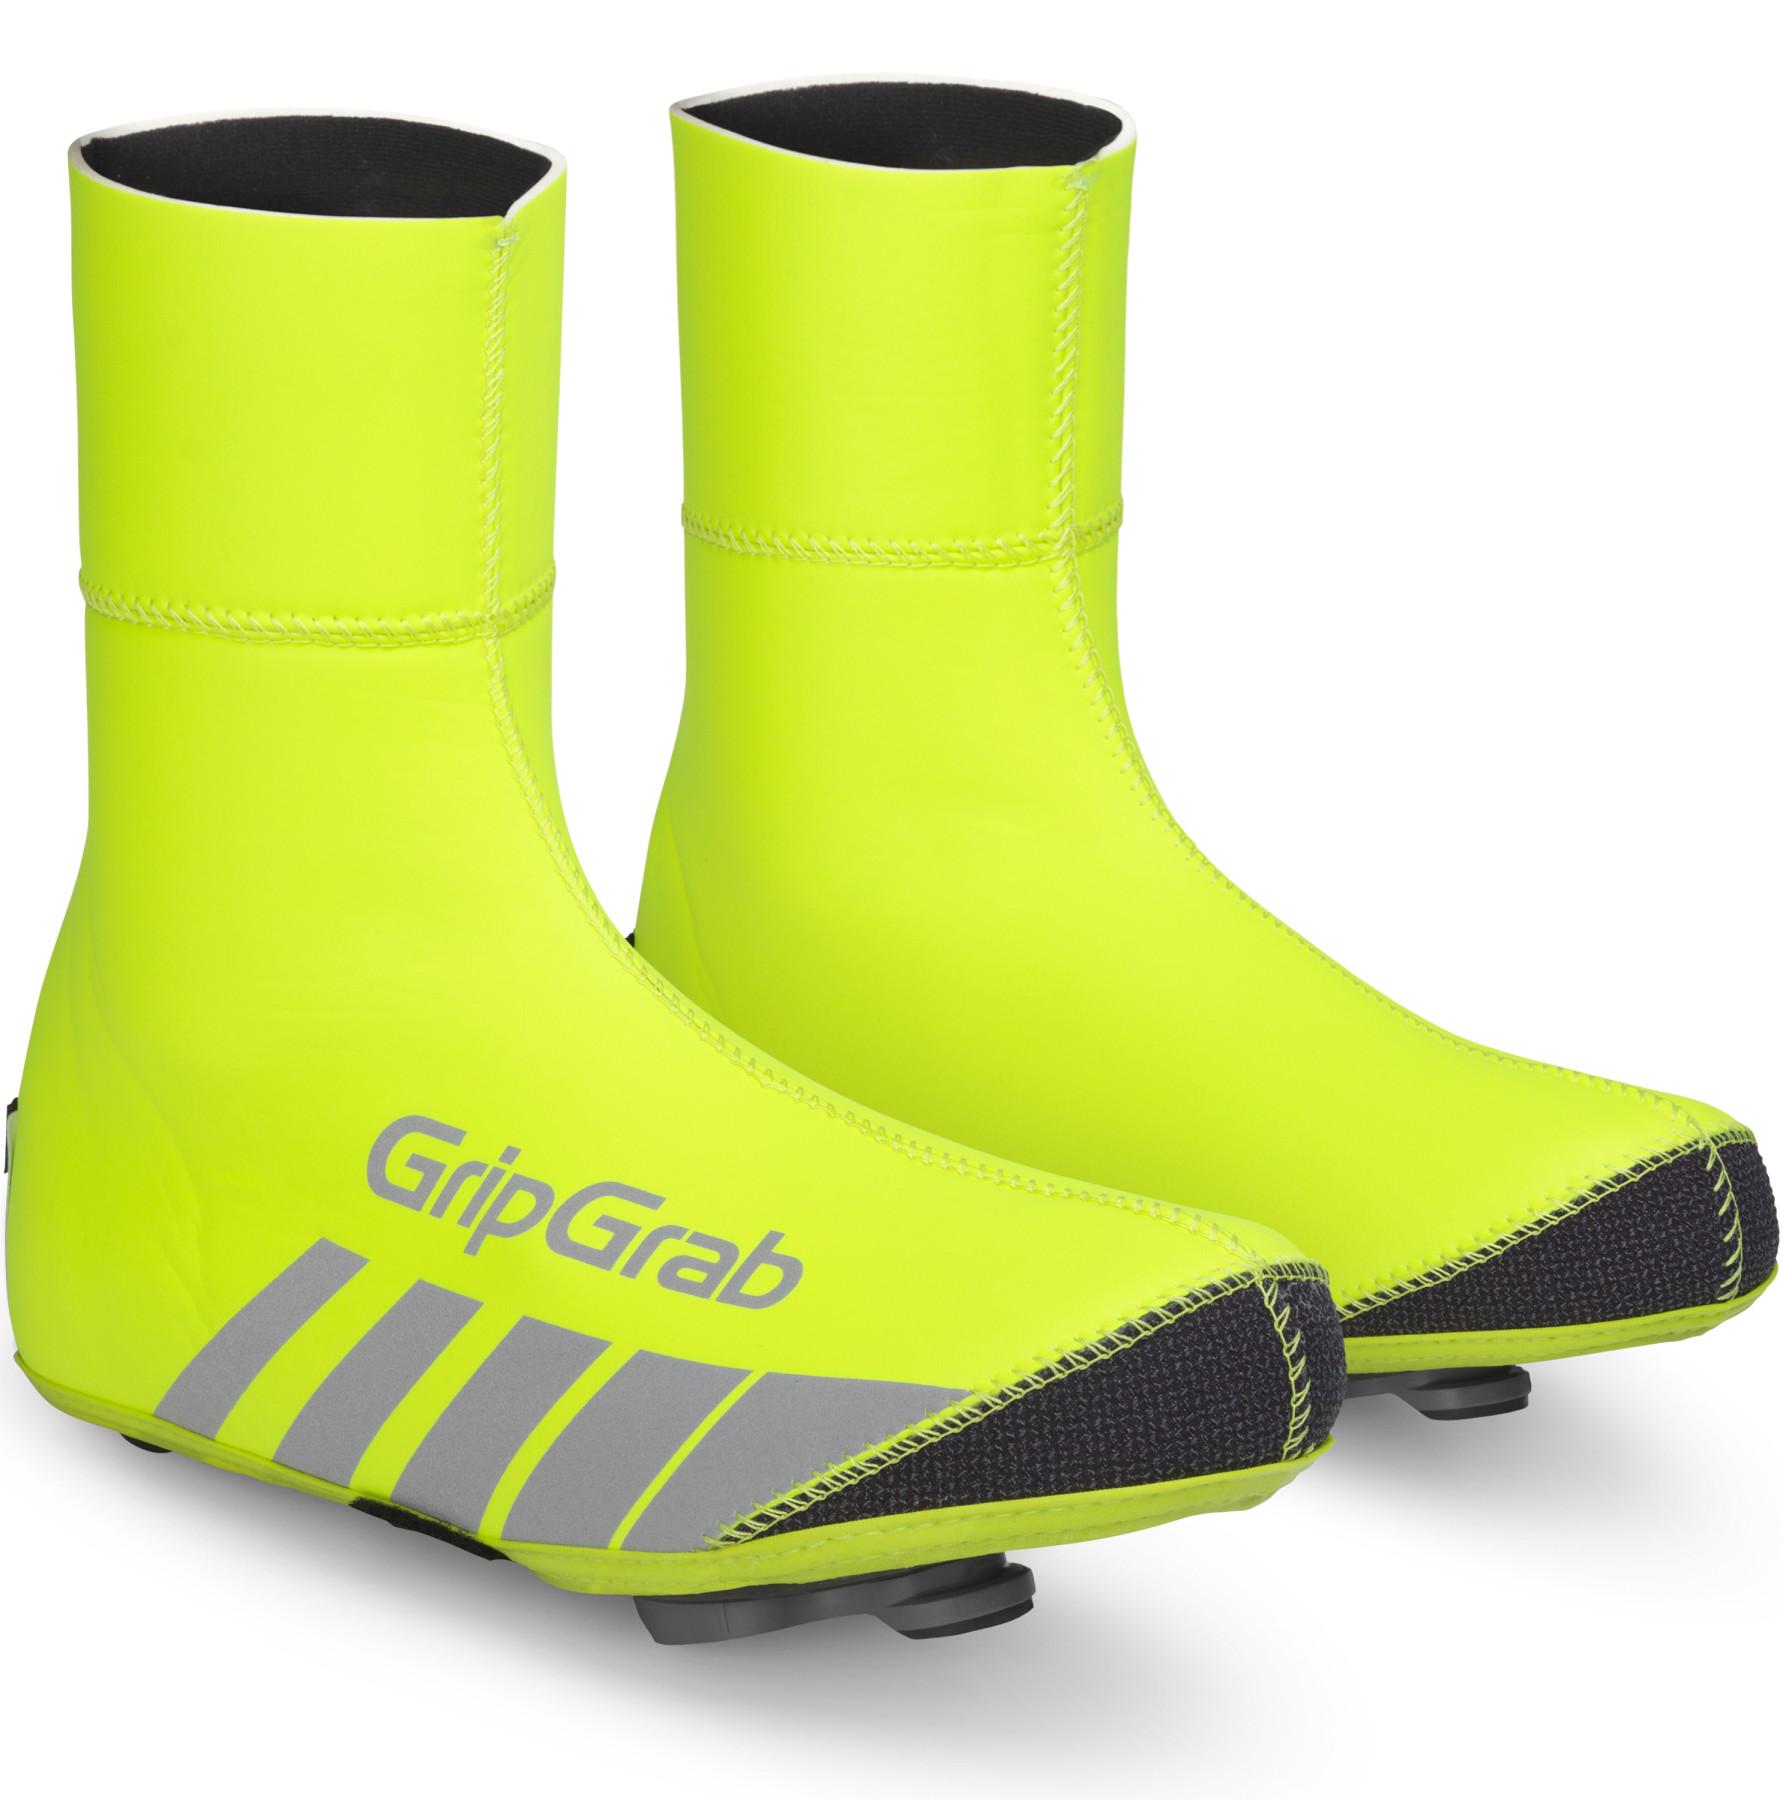 Gripgrab Racethermo Hi-vis Waterproof Overshoes  Fluorescent Yellow